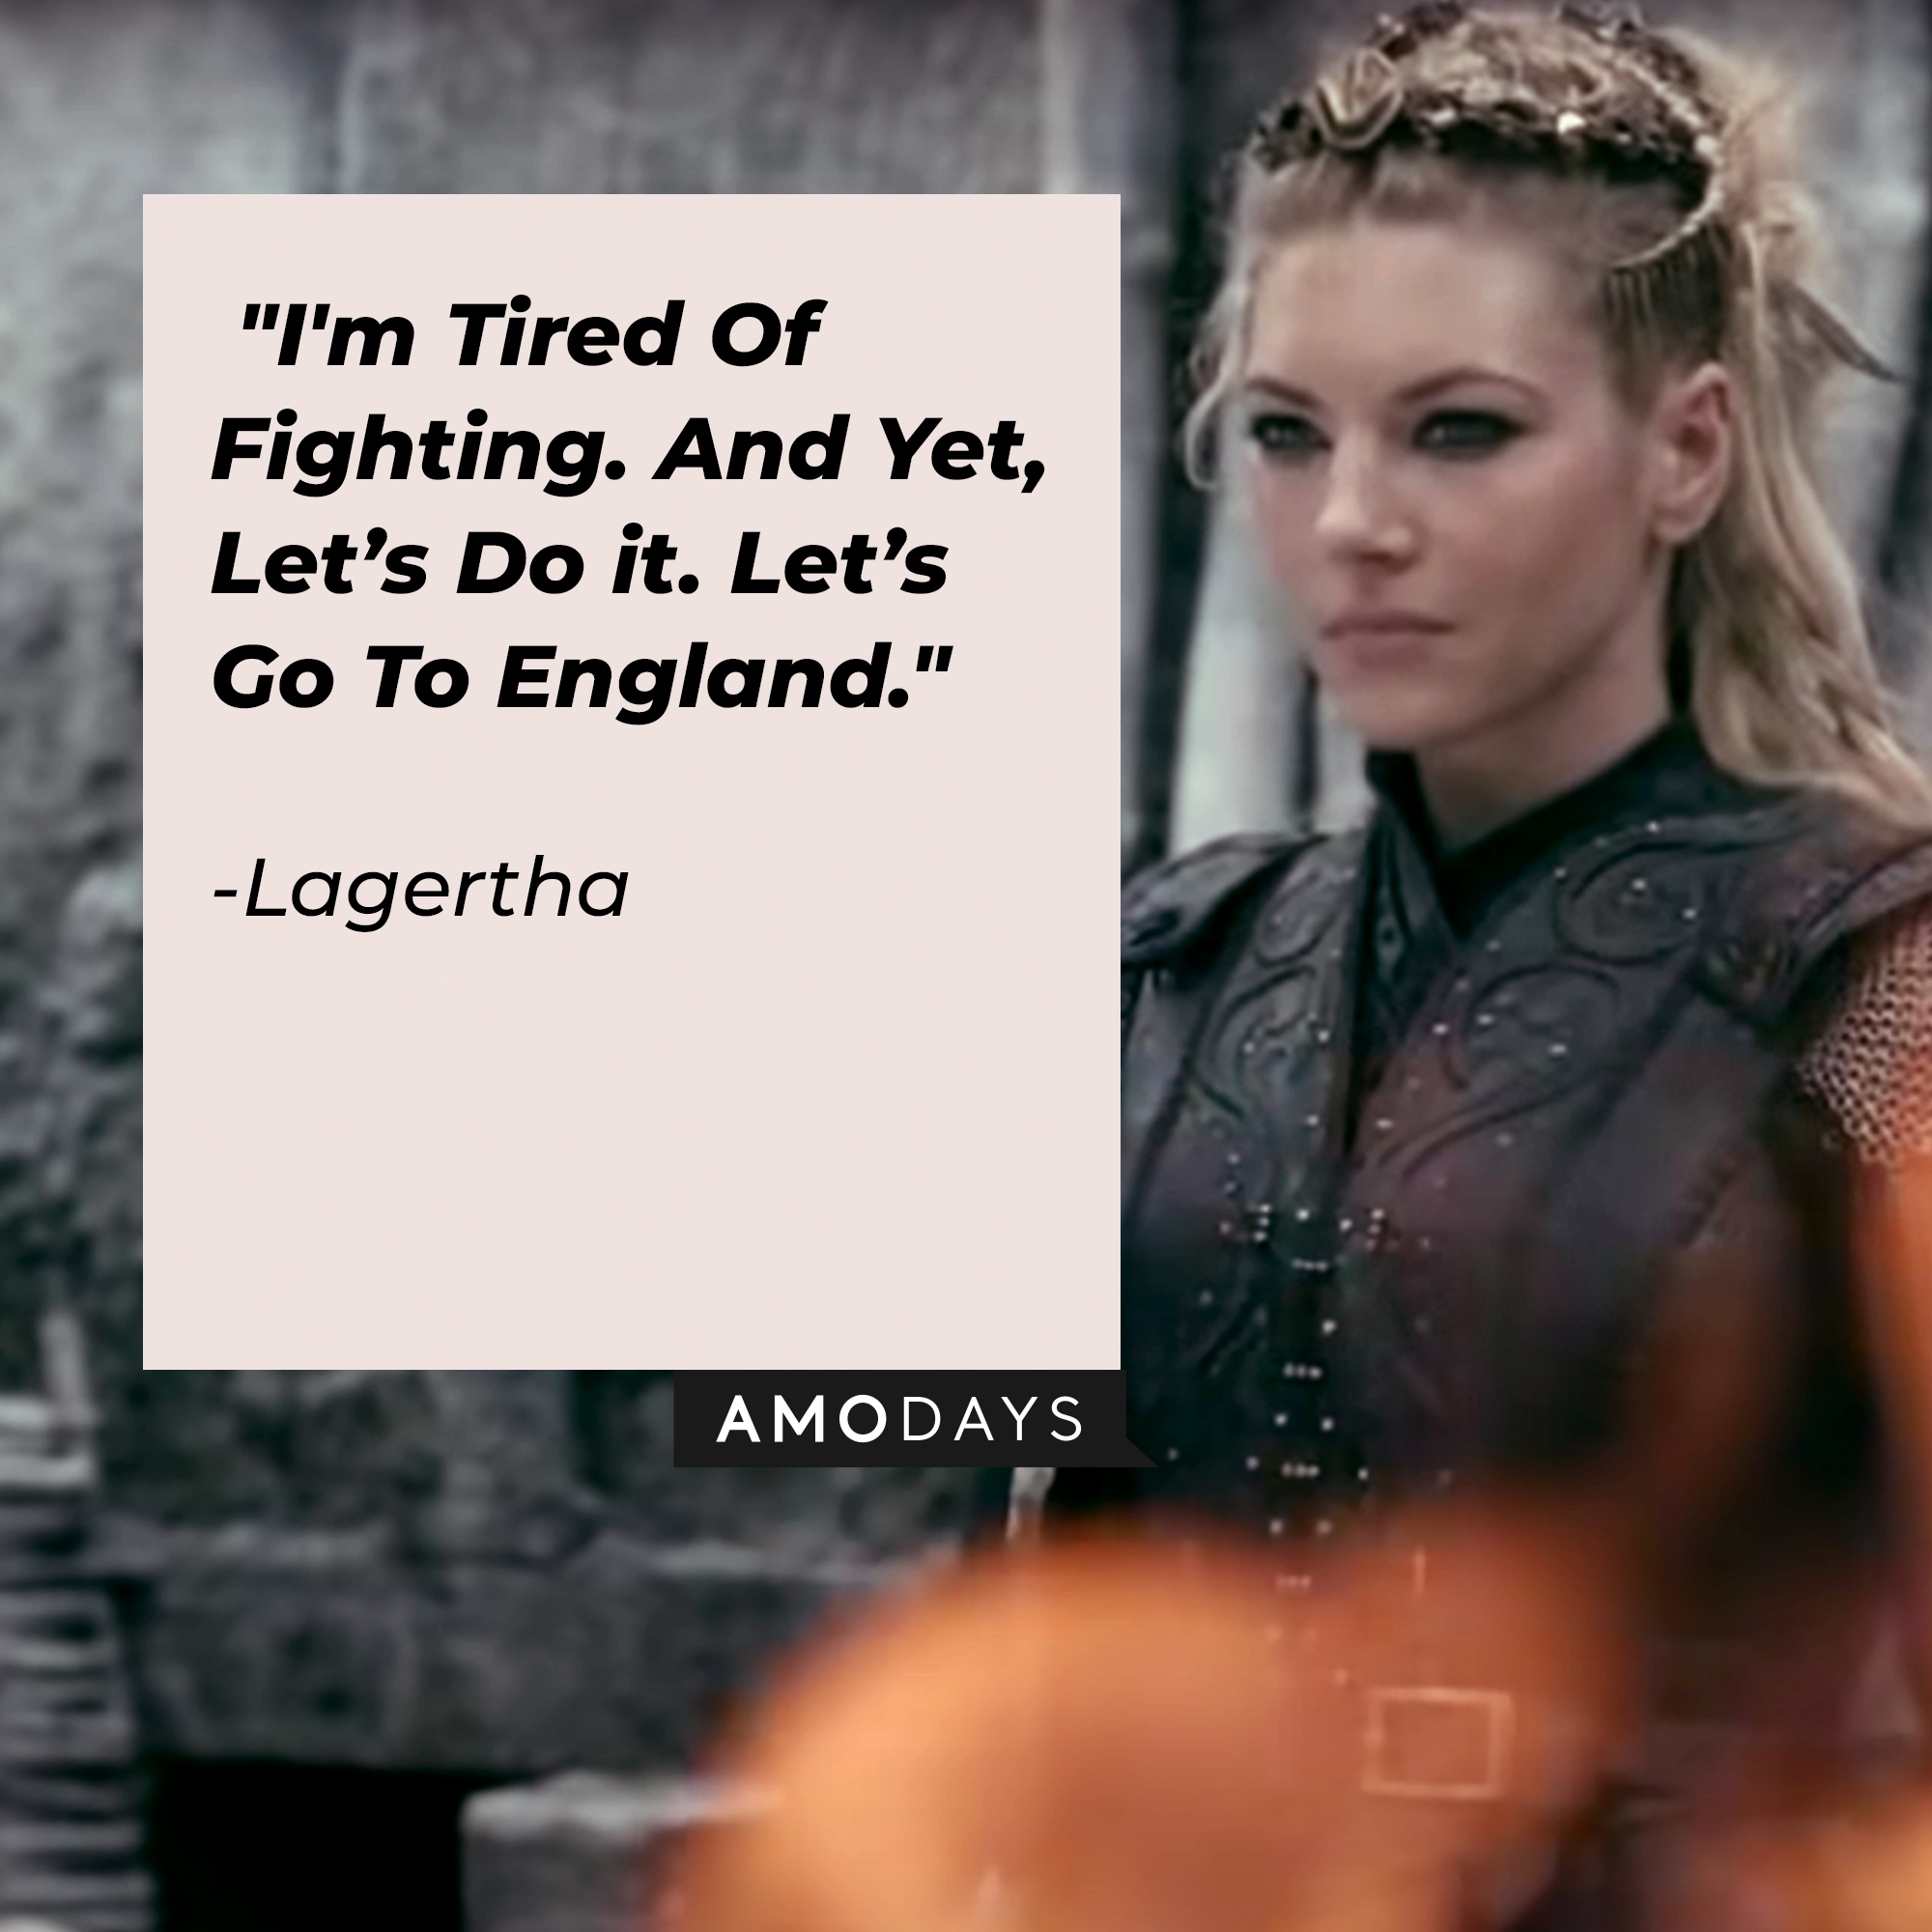 Lagertha's quote: "I'm Tired Of Fighting. And Yet, Let’s Do it. Let’s Go To England." | Source: youtube.com/PrimeVideoUK